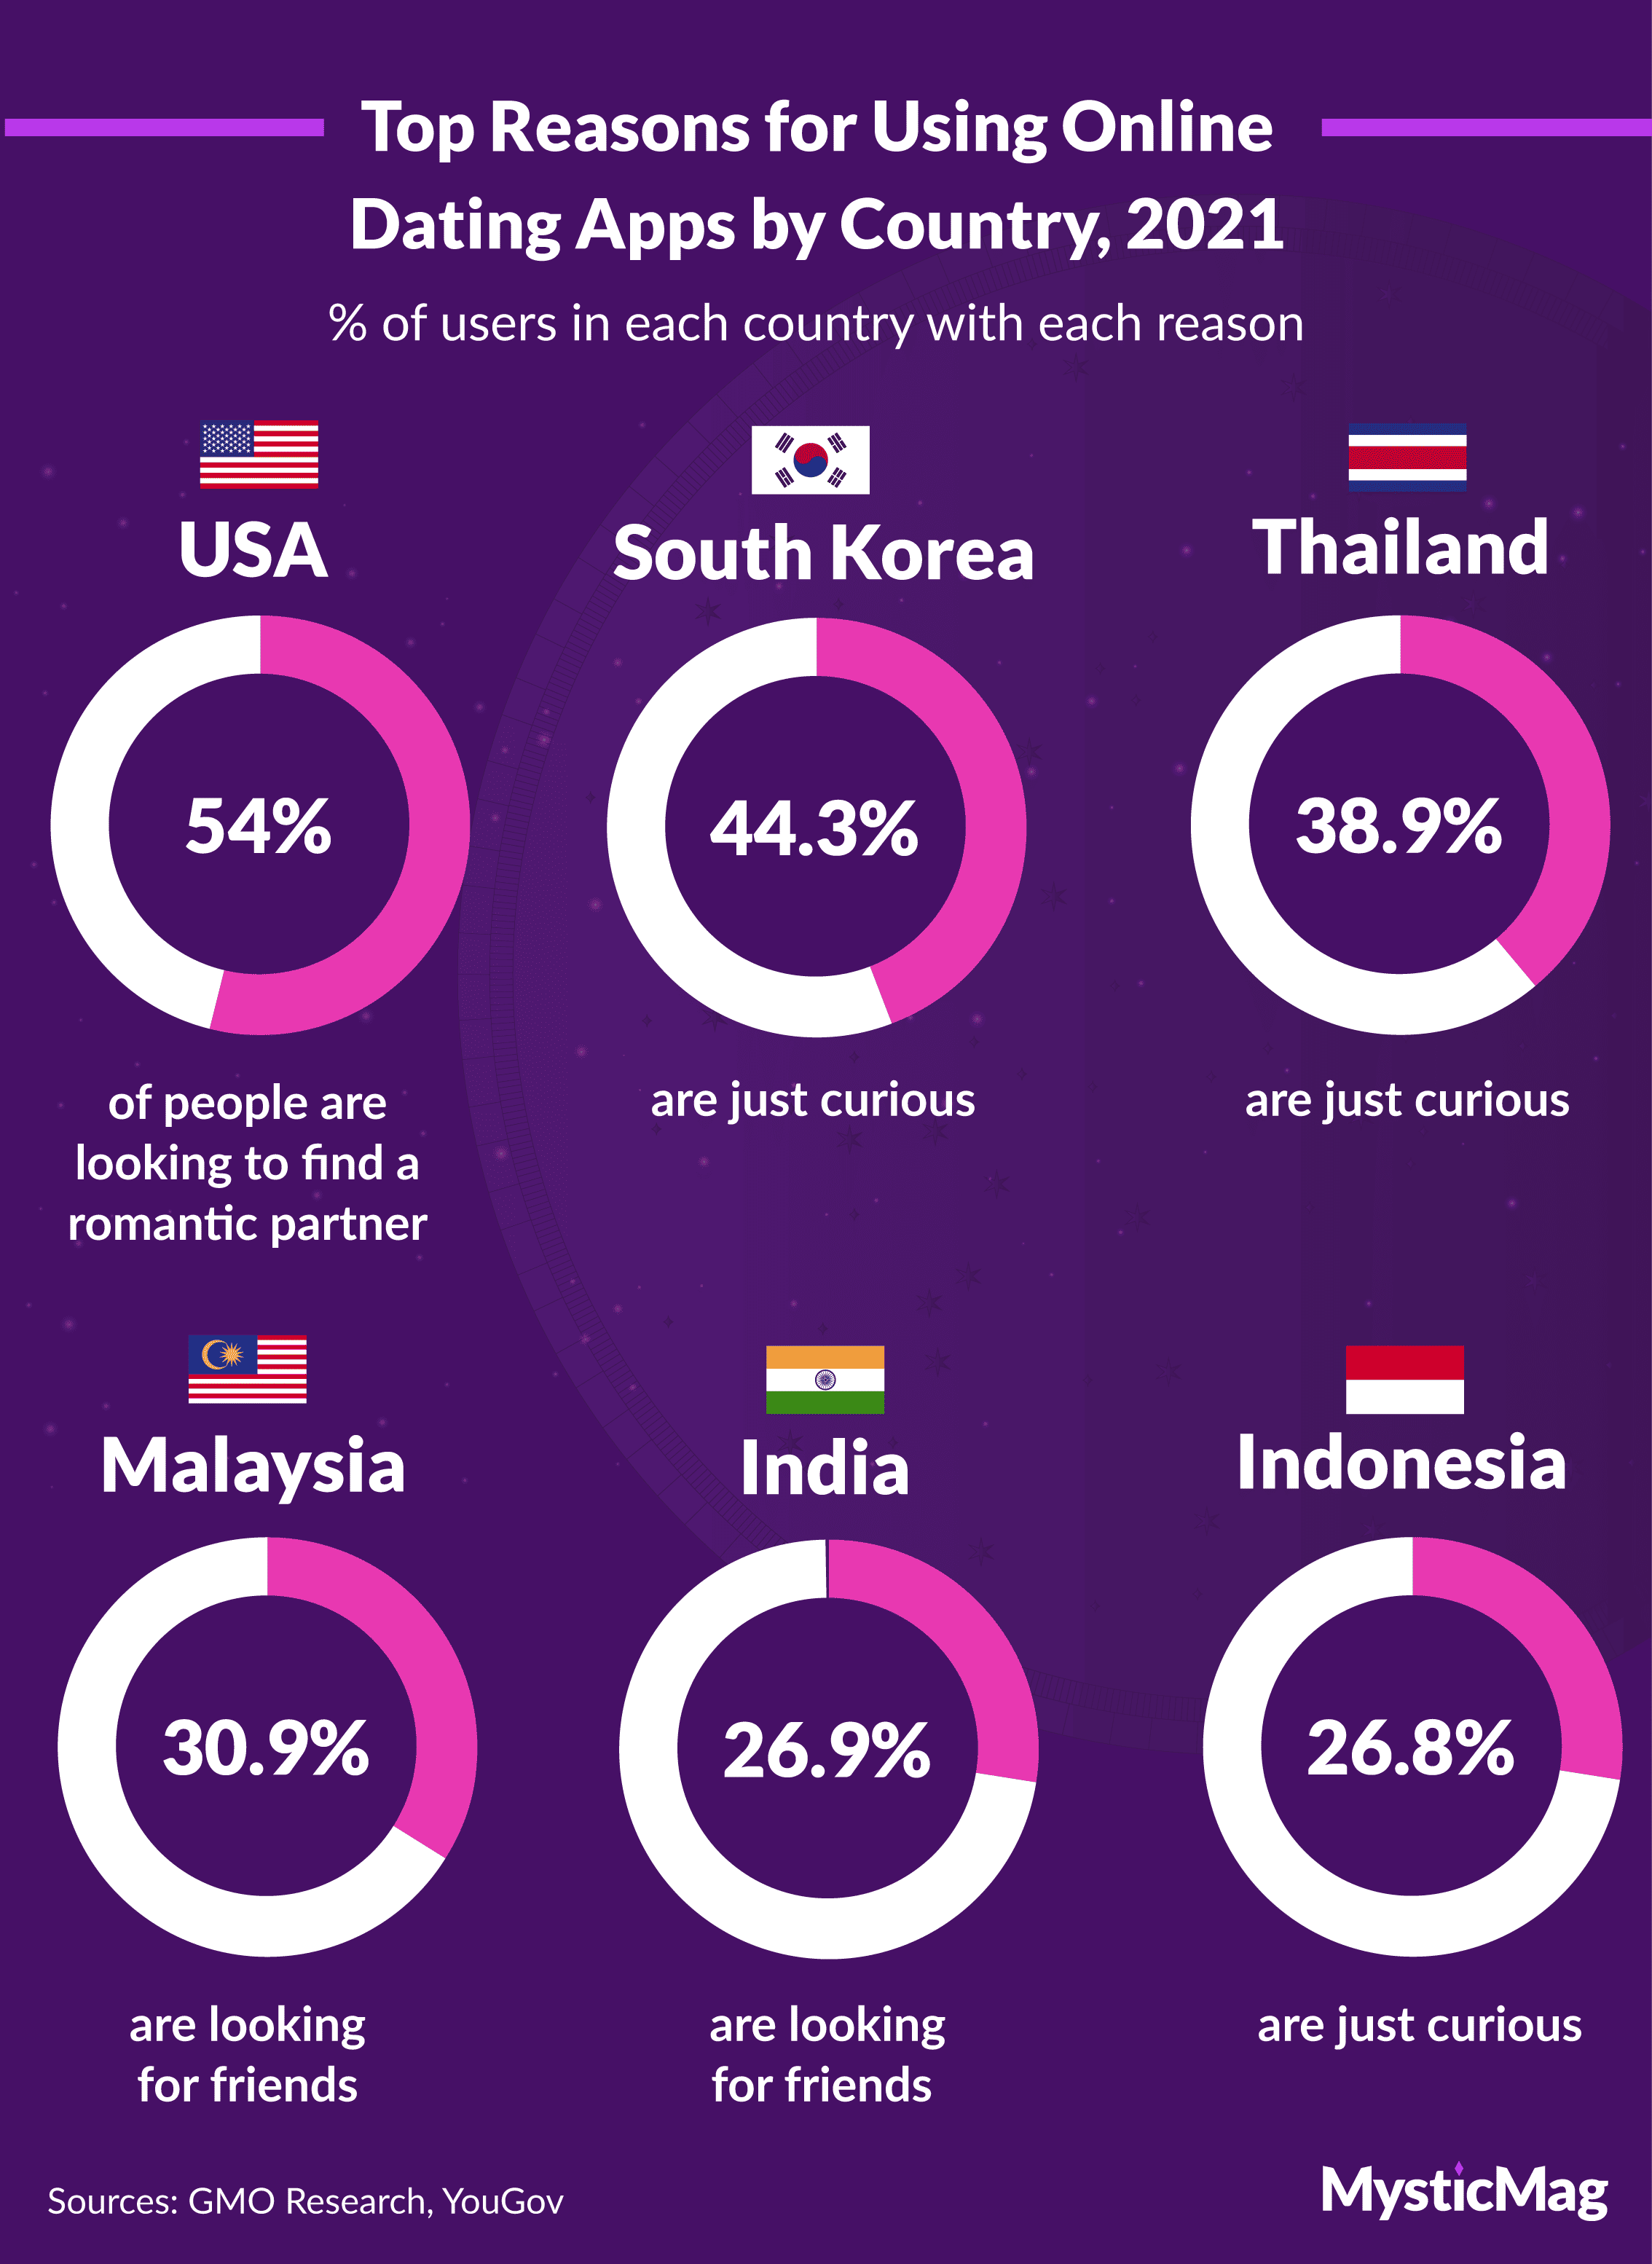 Top reasons for using online dating apps, U.S. vs. select Asian nations